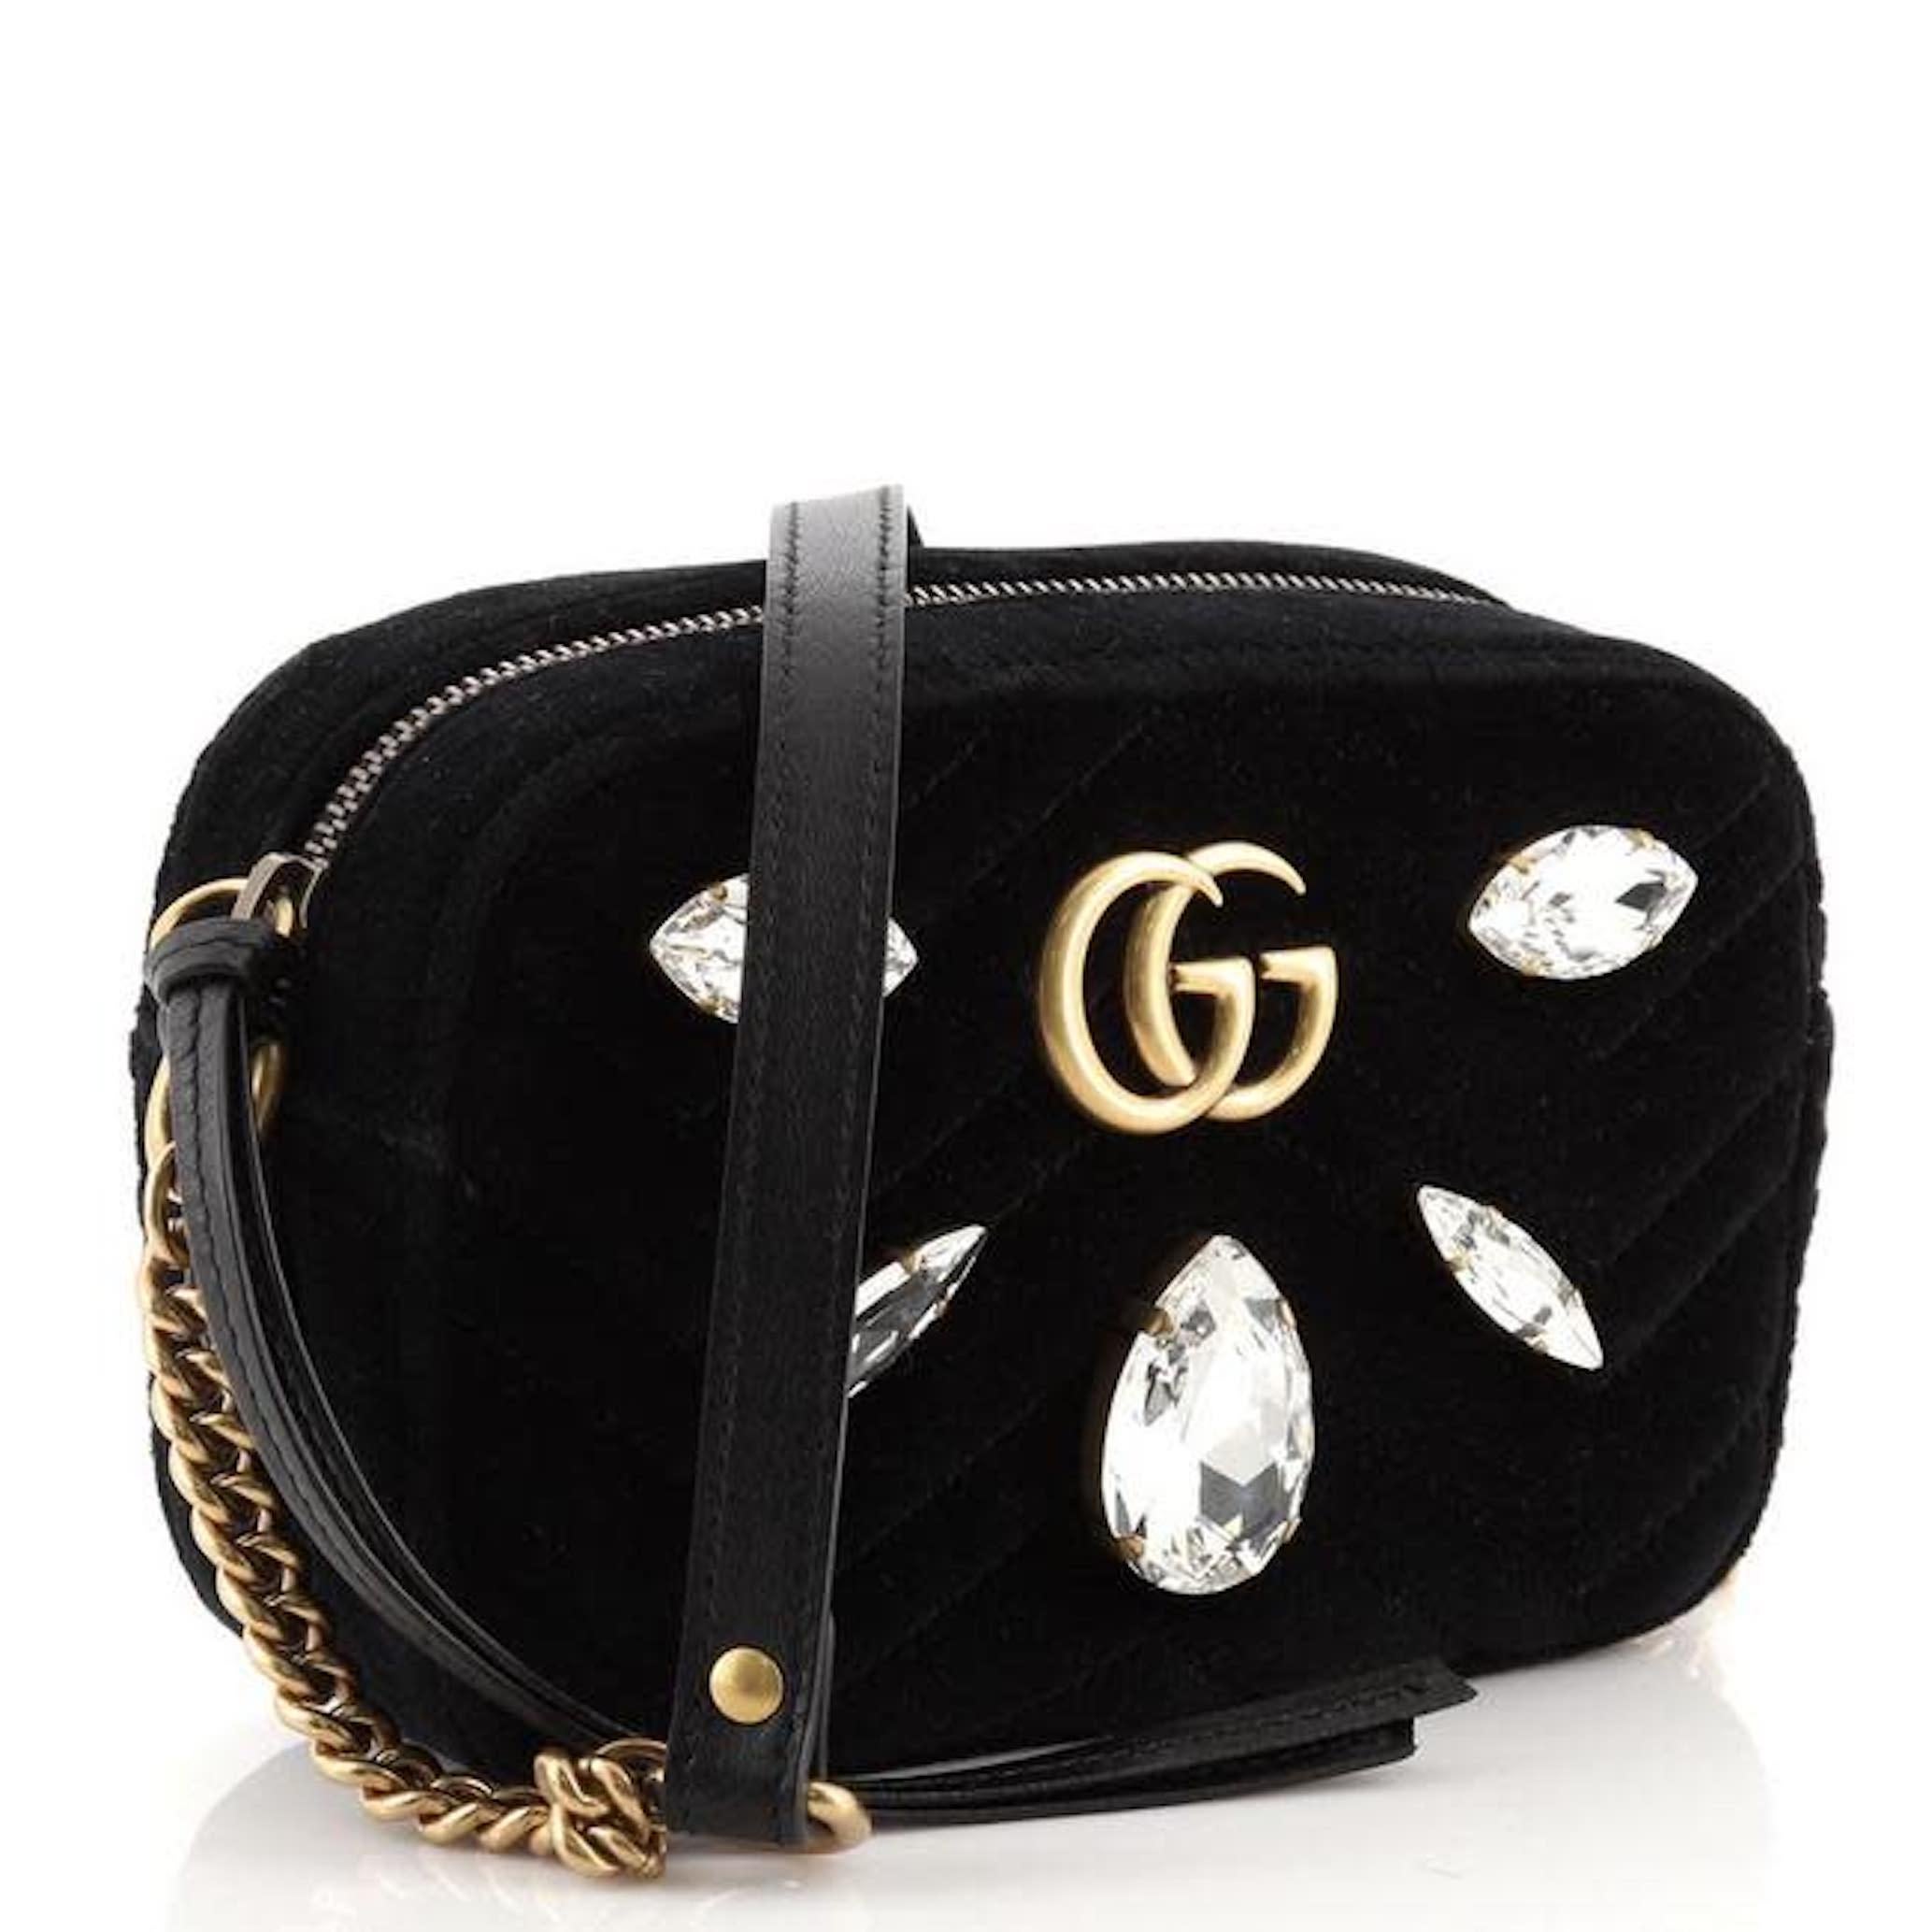 This Gucci shoulder bag is crafted of soft velvet in black. It features an aged gold chain, a chain link and leather shoulder strap. The front features an interlocking aged gold GG logo and bold marquise crystals. The bag opens to a pink satin